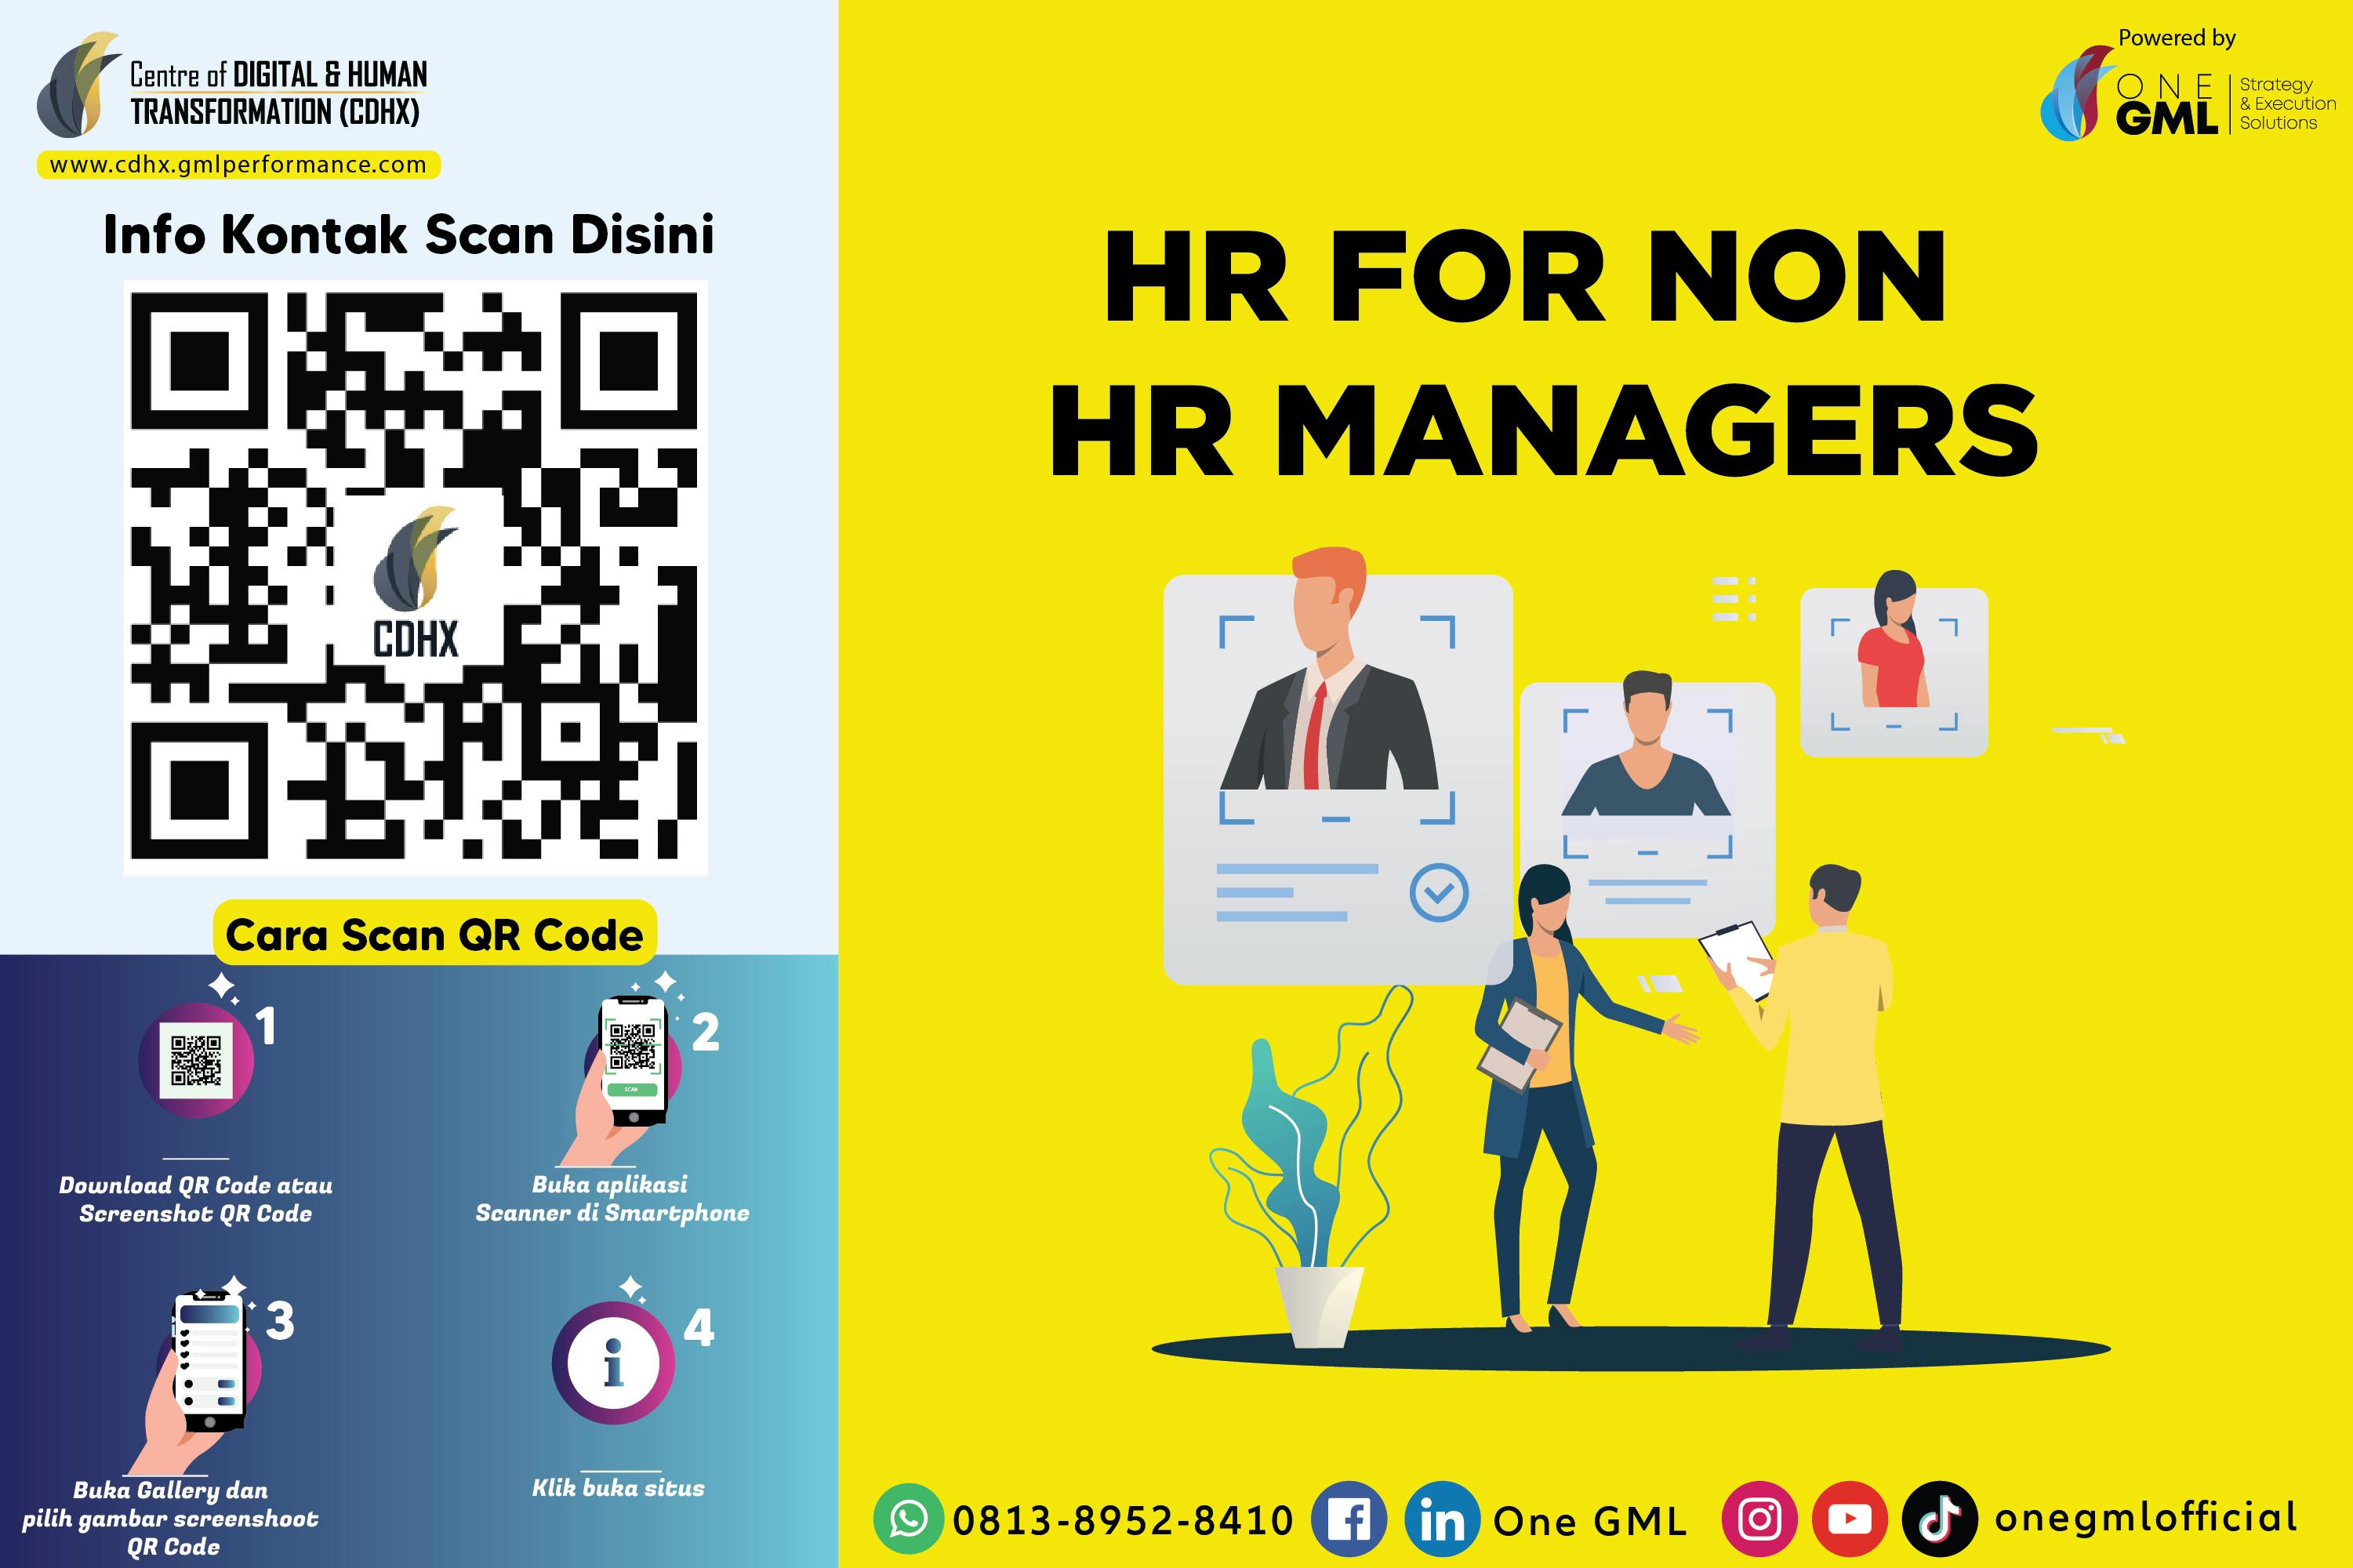 HR for Non HR Managers